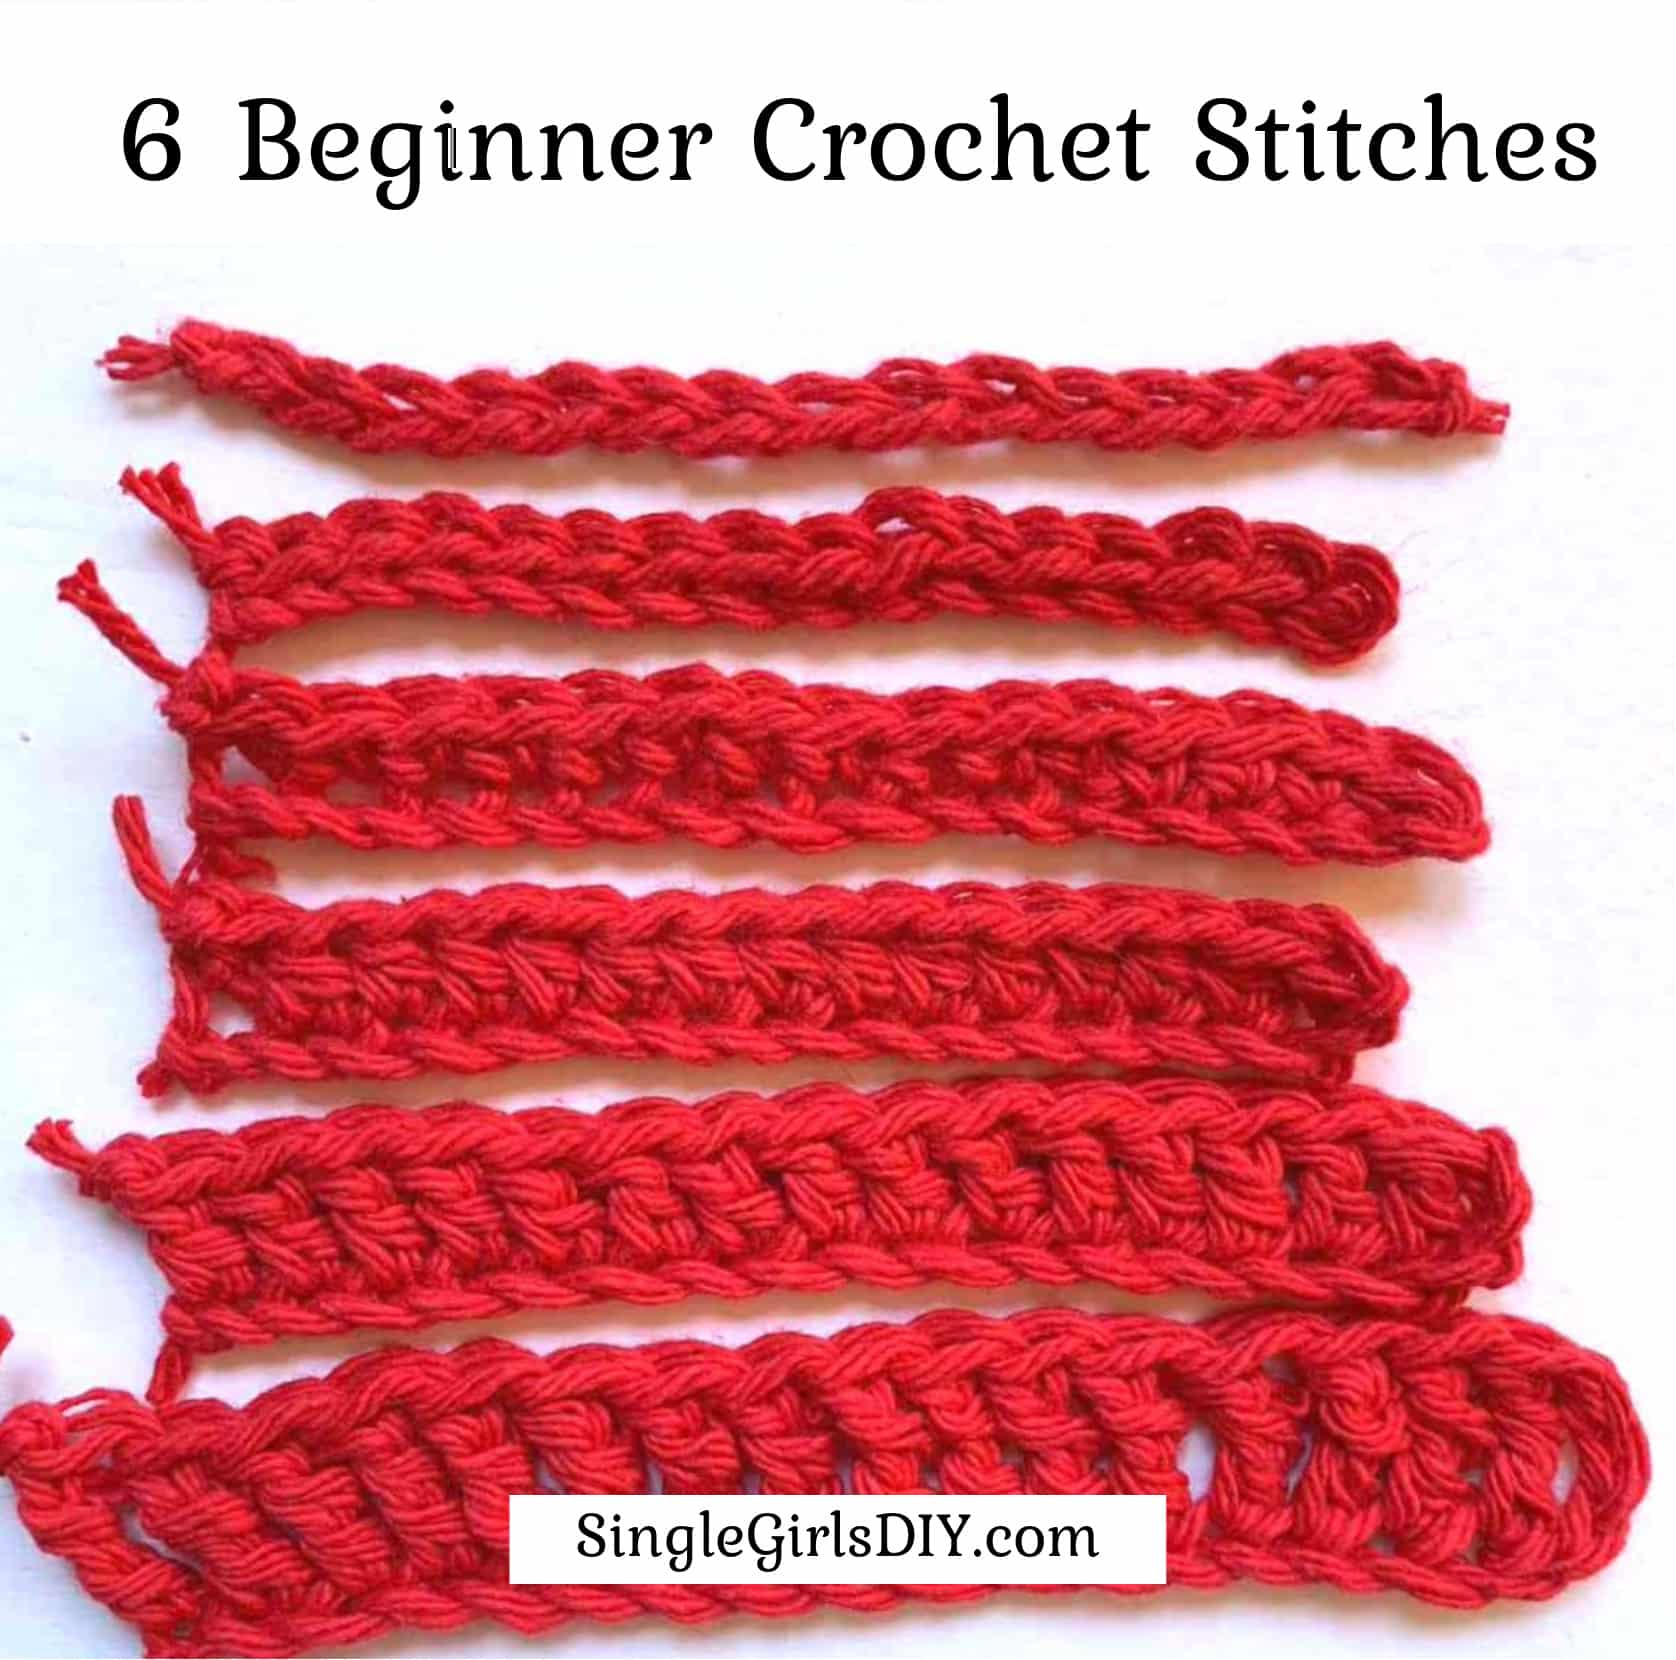 6 Beginner Crochet Stitches: The Basics You Need to Learn - Single